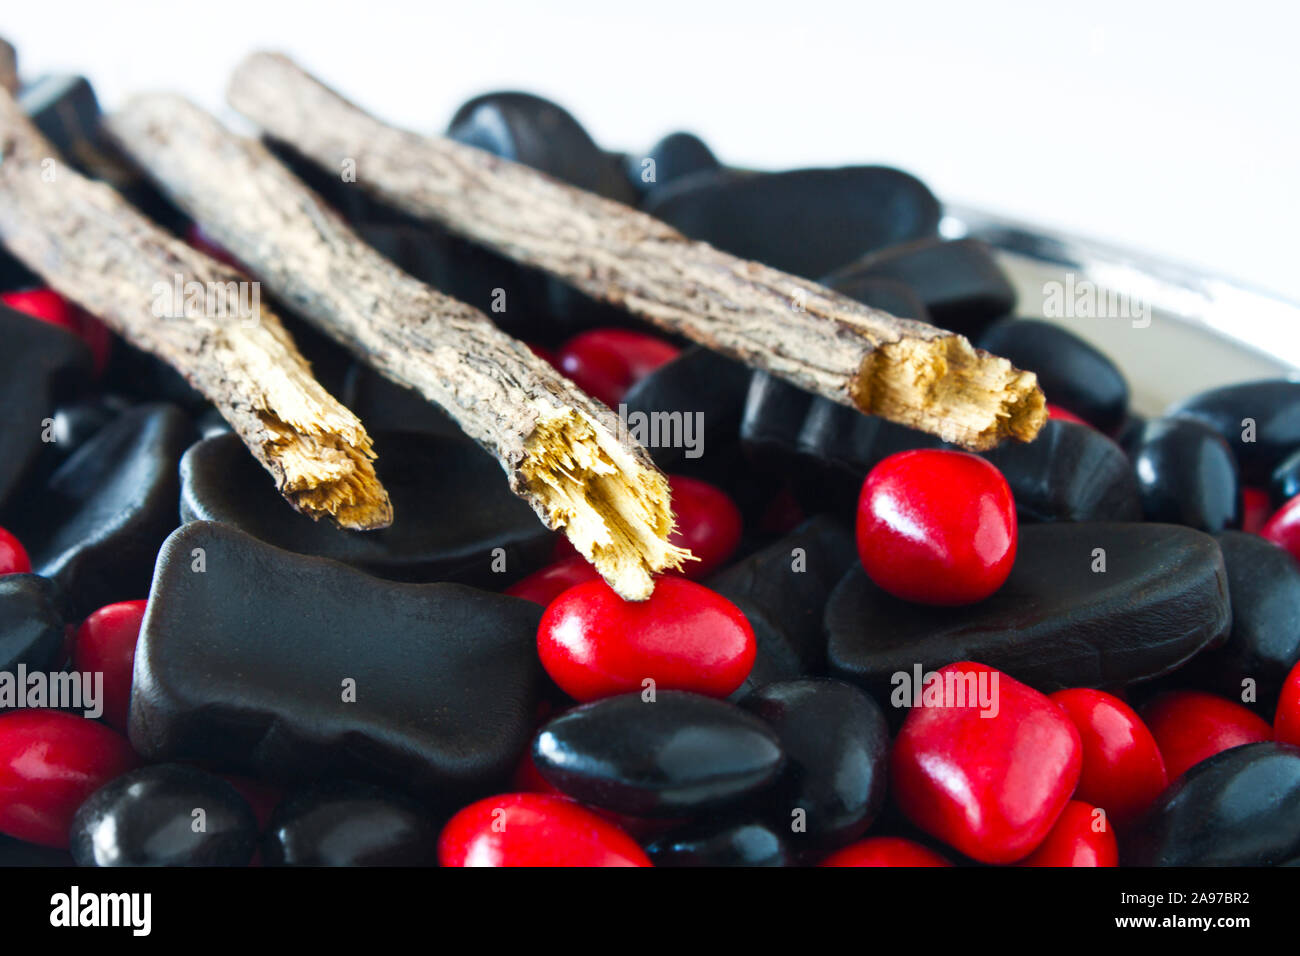 Licorice candy and root close up Stock Photo